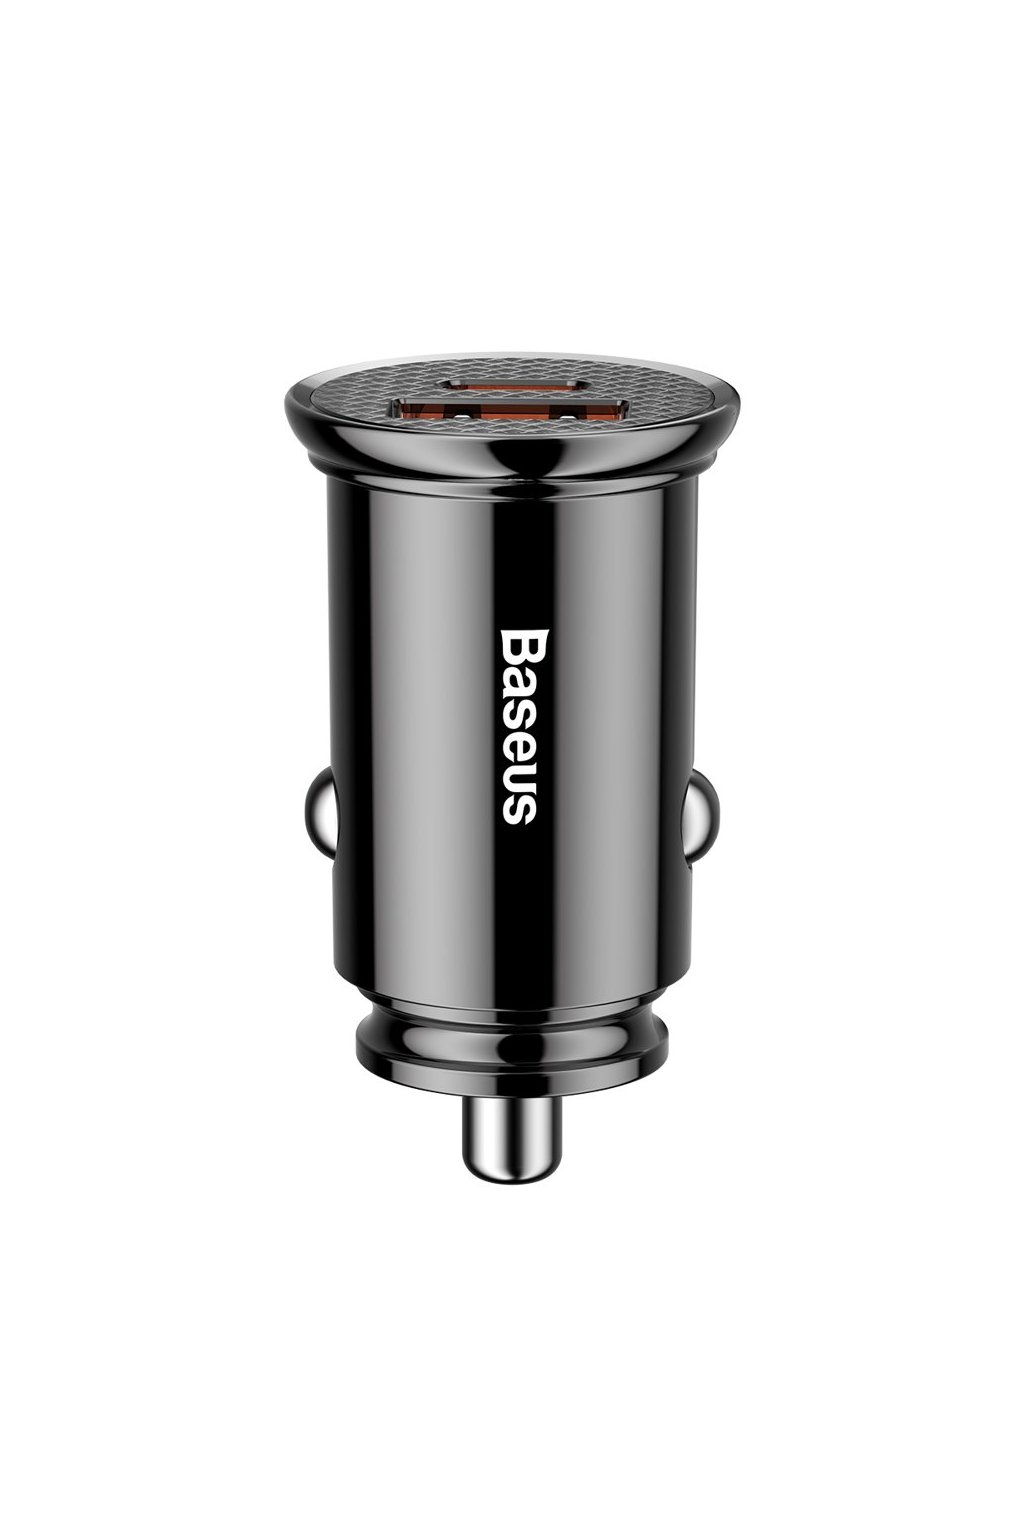 eng pl Baseus Circular PPS Universal Smart Car Charger USB Quick Charge 4 0 QC 4 0 and USB C PD 3 0 SCP black CCALL YS01 46980 1